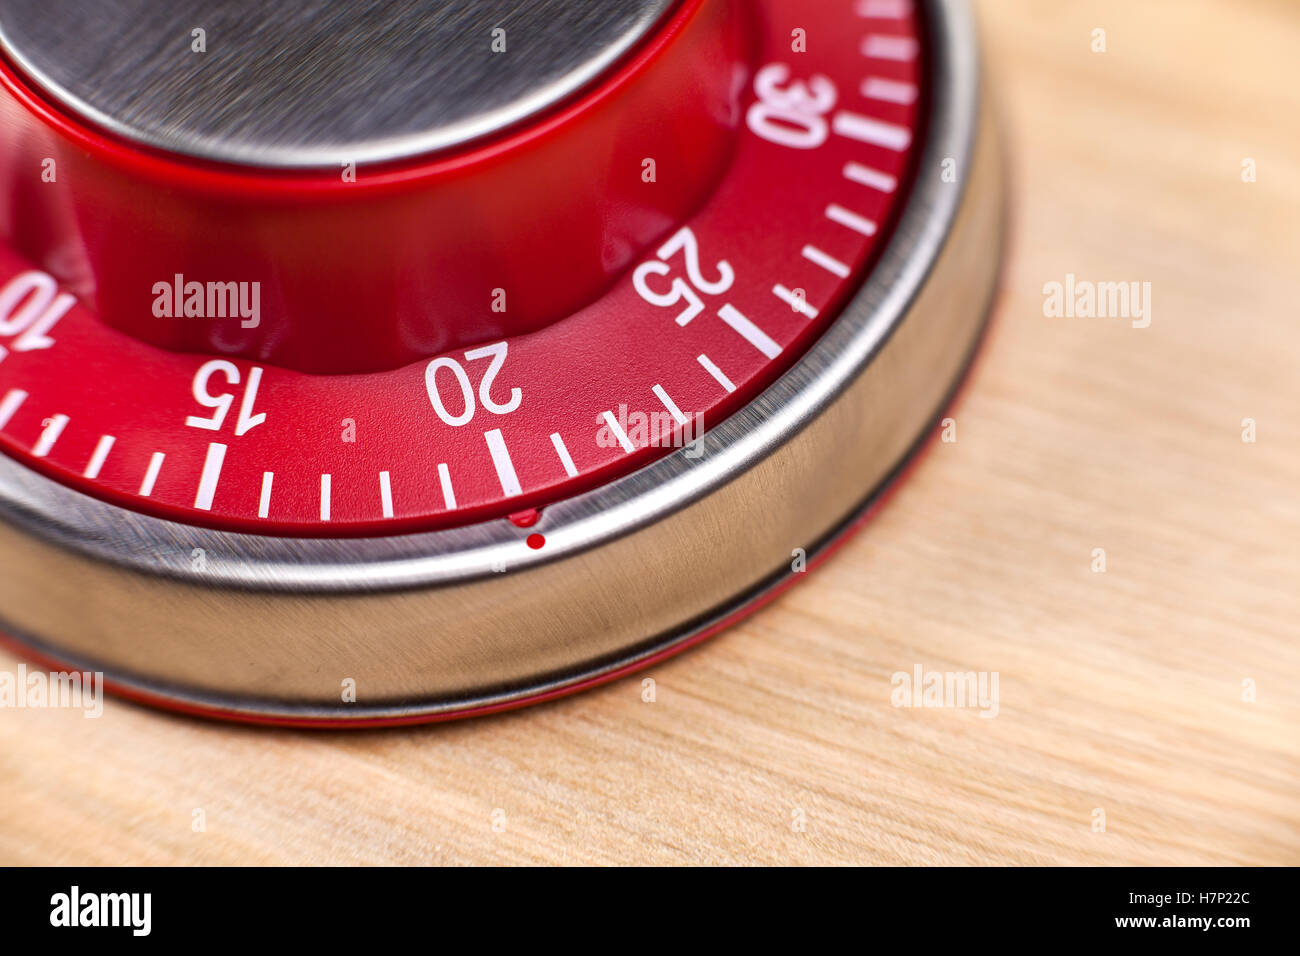 Macro view of a red kitchen egg timer showing 20 minutes on wooden background Stock Photo